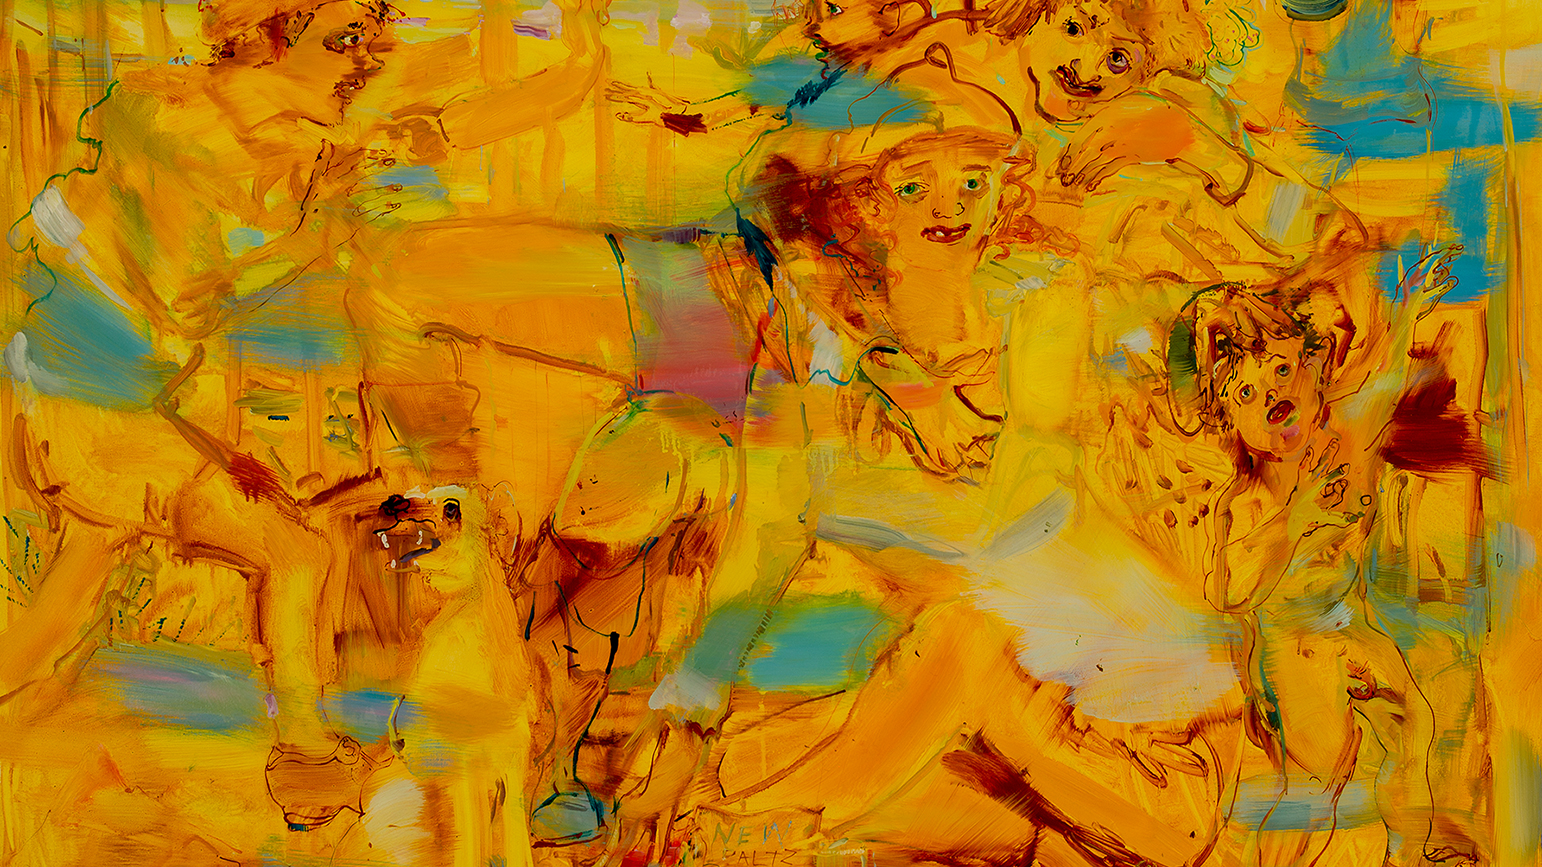 Painting by Angela Dufresne featuring loosely sketched human figures moving across the canvas against a yellow background with brush strokes of blue.